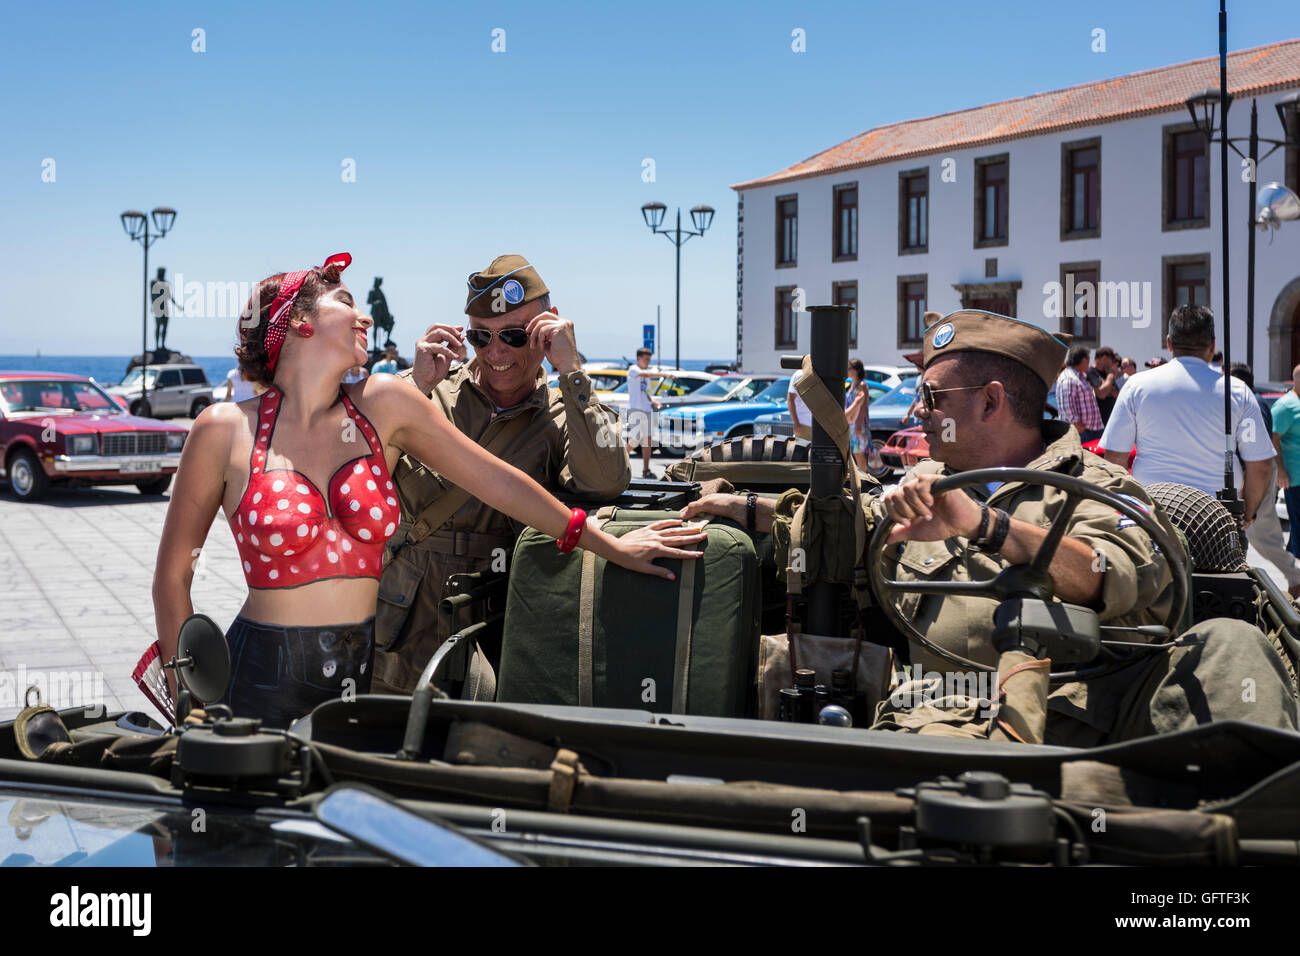 Body painted Pin up girl photographed with players in US army gear at the American cars and motorcycles gathering in the Plaza d Stock Photo